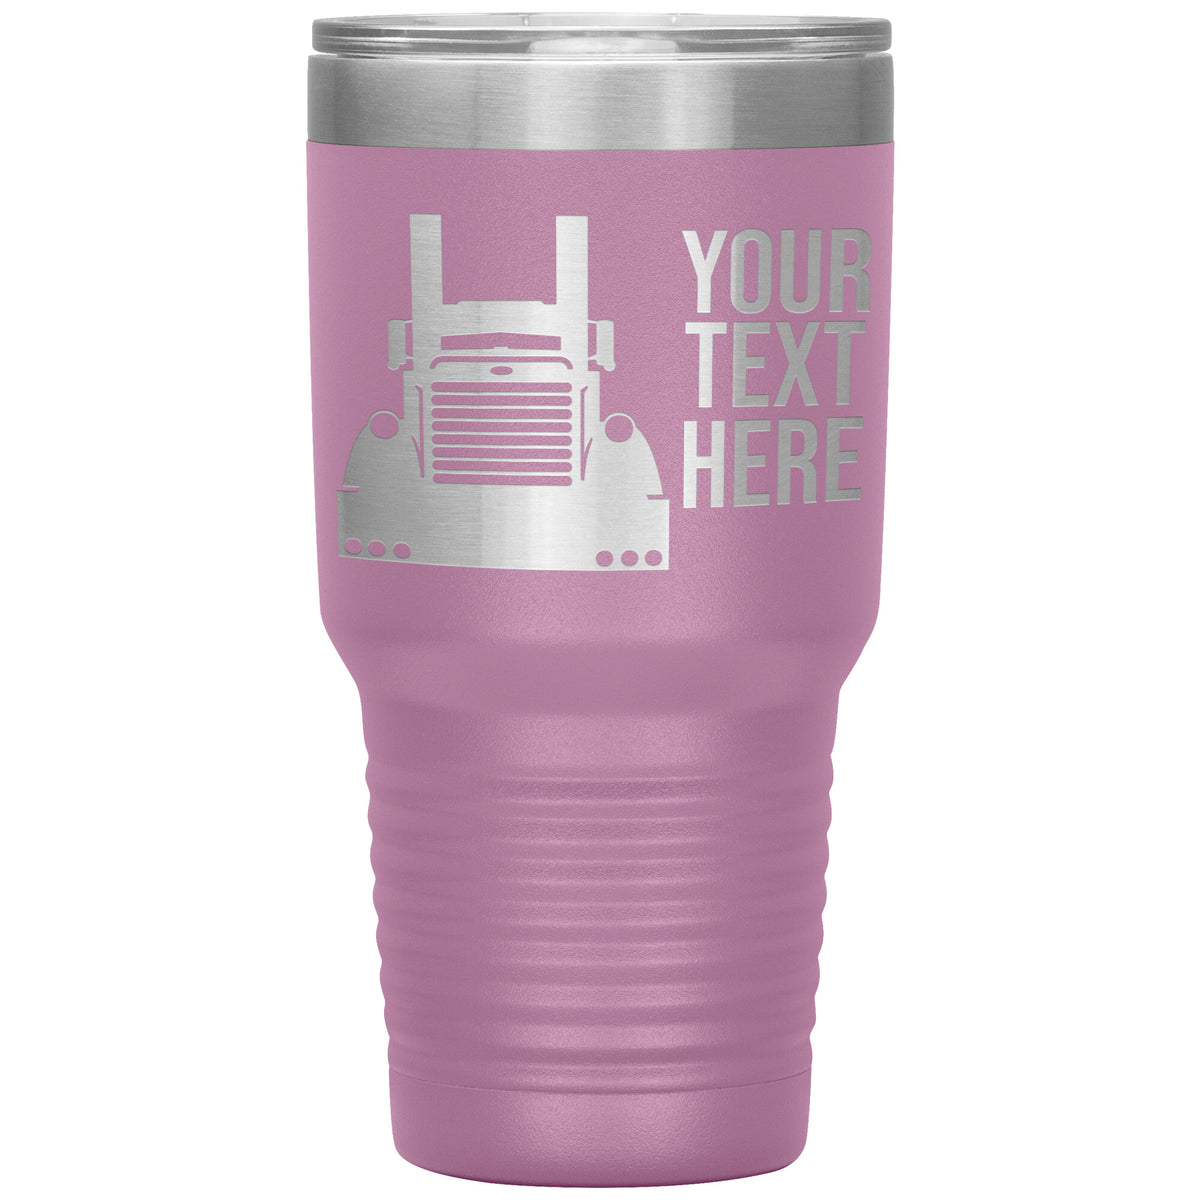 Pete 379 Your Text Here 30oz Tumbler Free Shipping